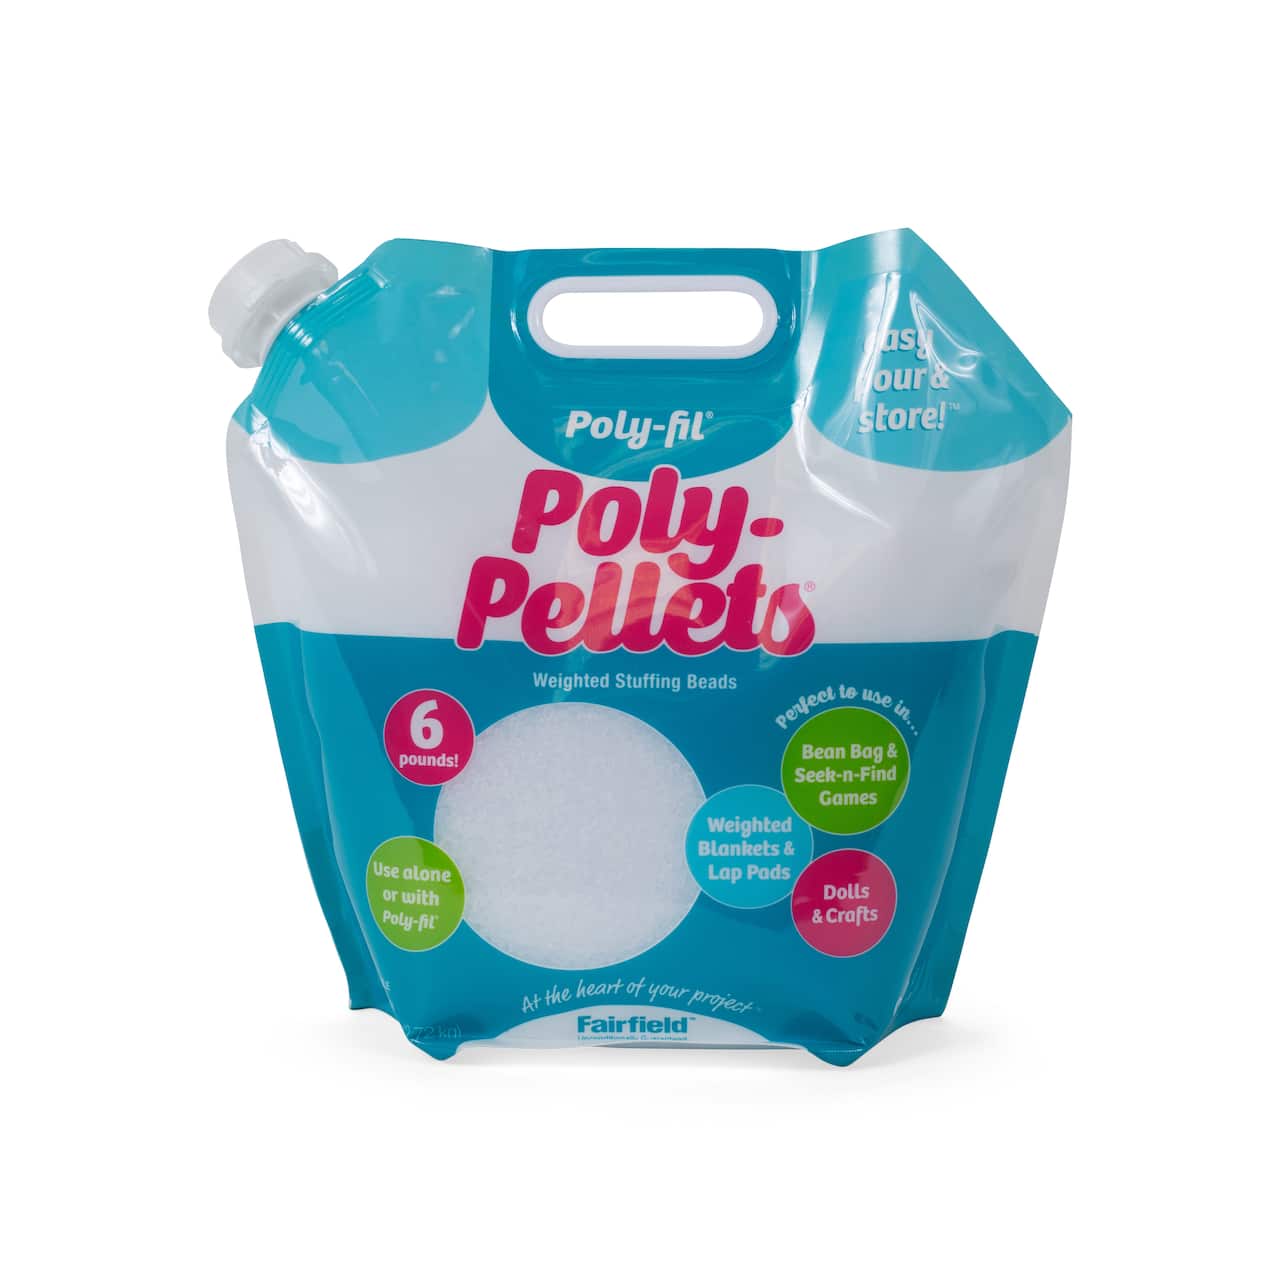 Poly-Fil® Poly Pellets® Weighted Stuffing Beads, 6lb.